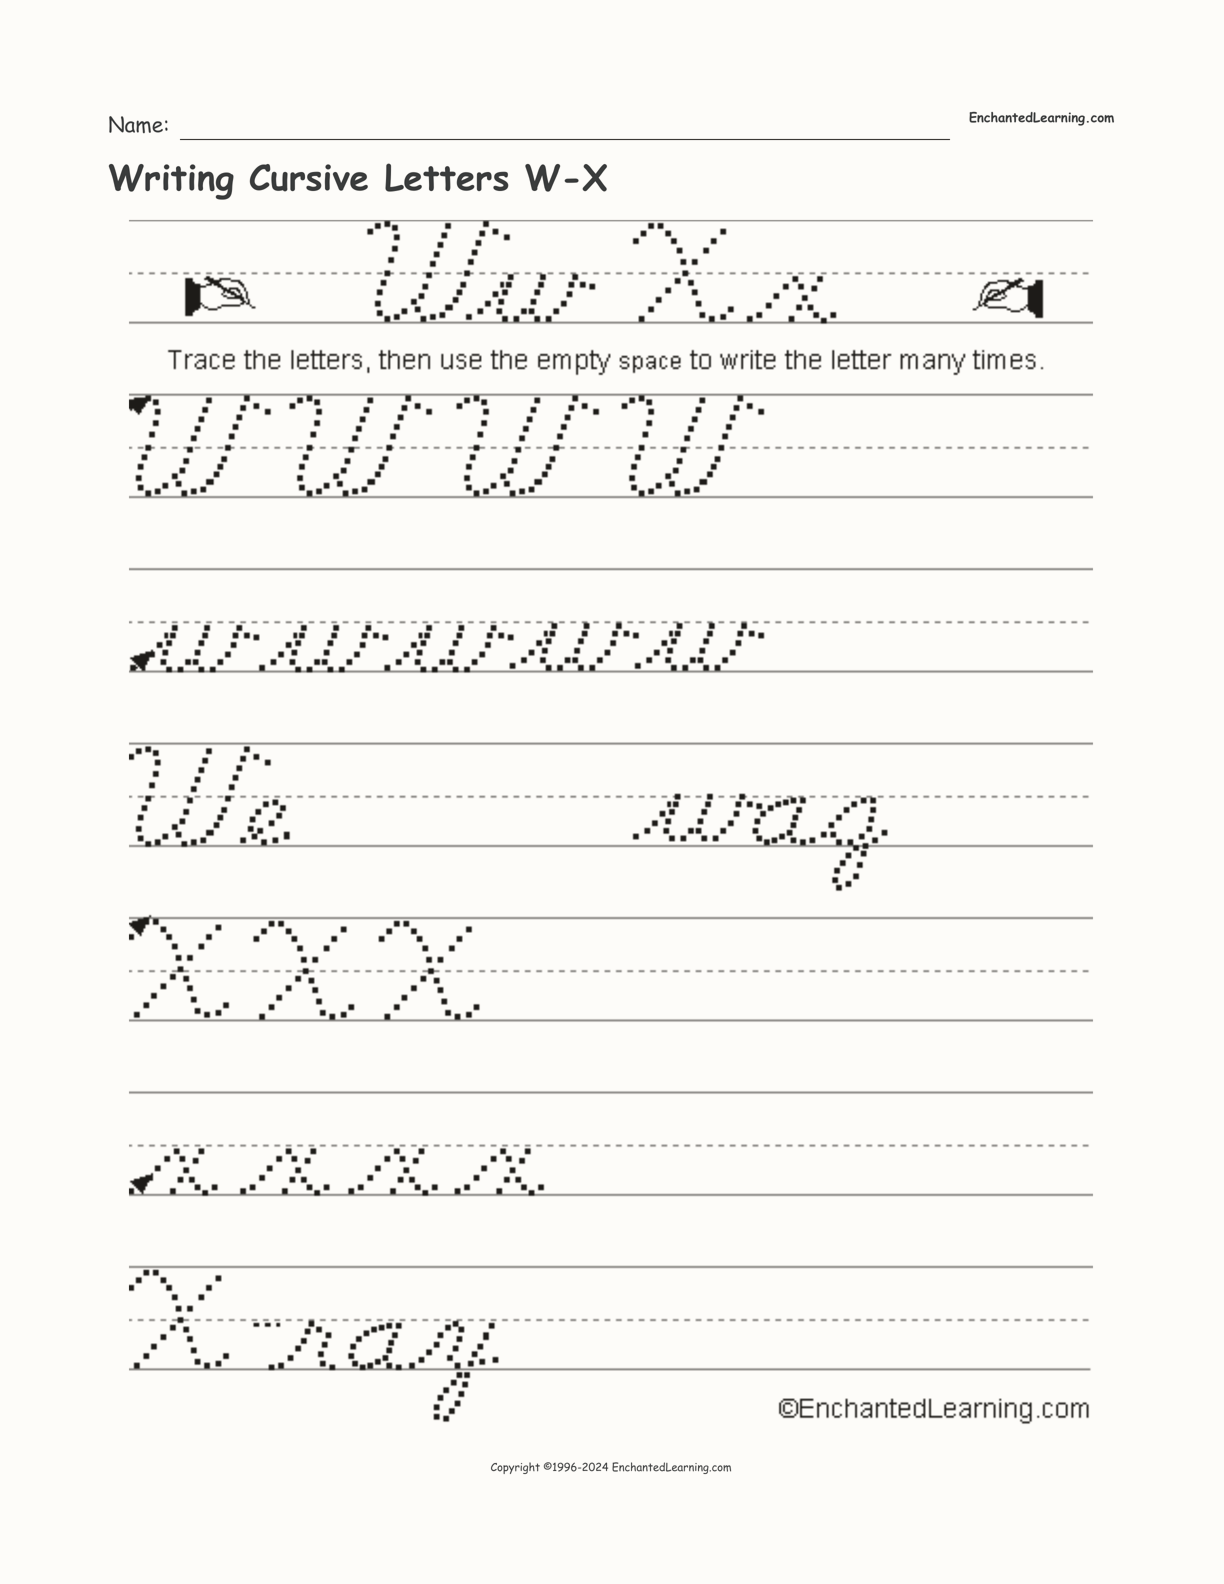 Writing Cursive Letters W-X interactive worksheet page 1